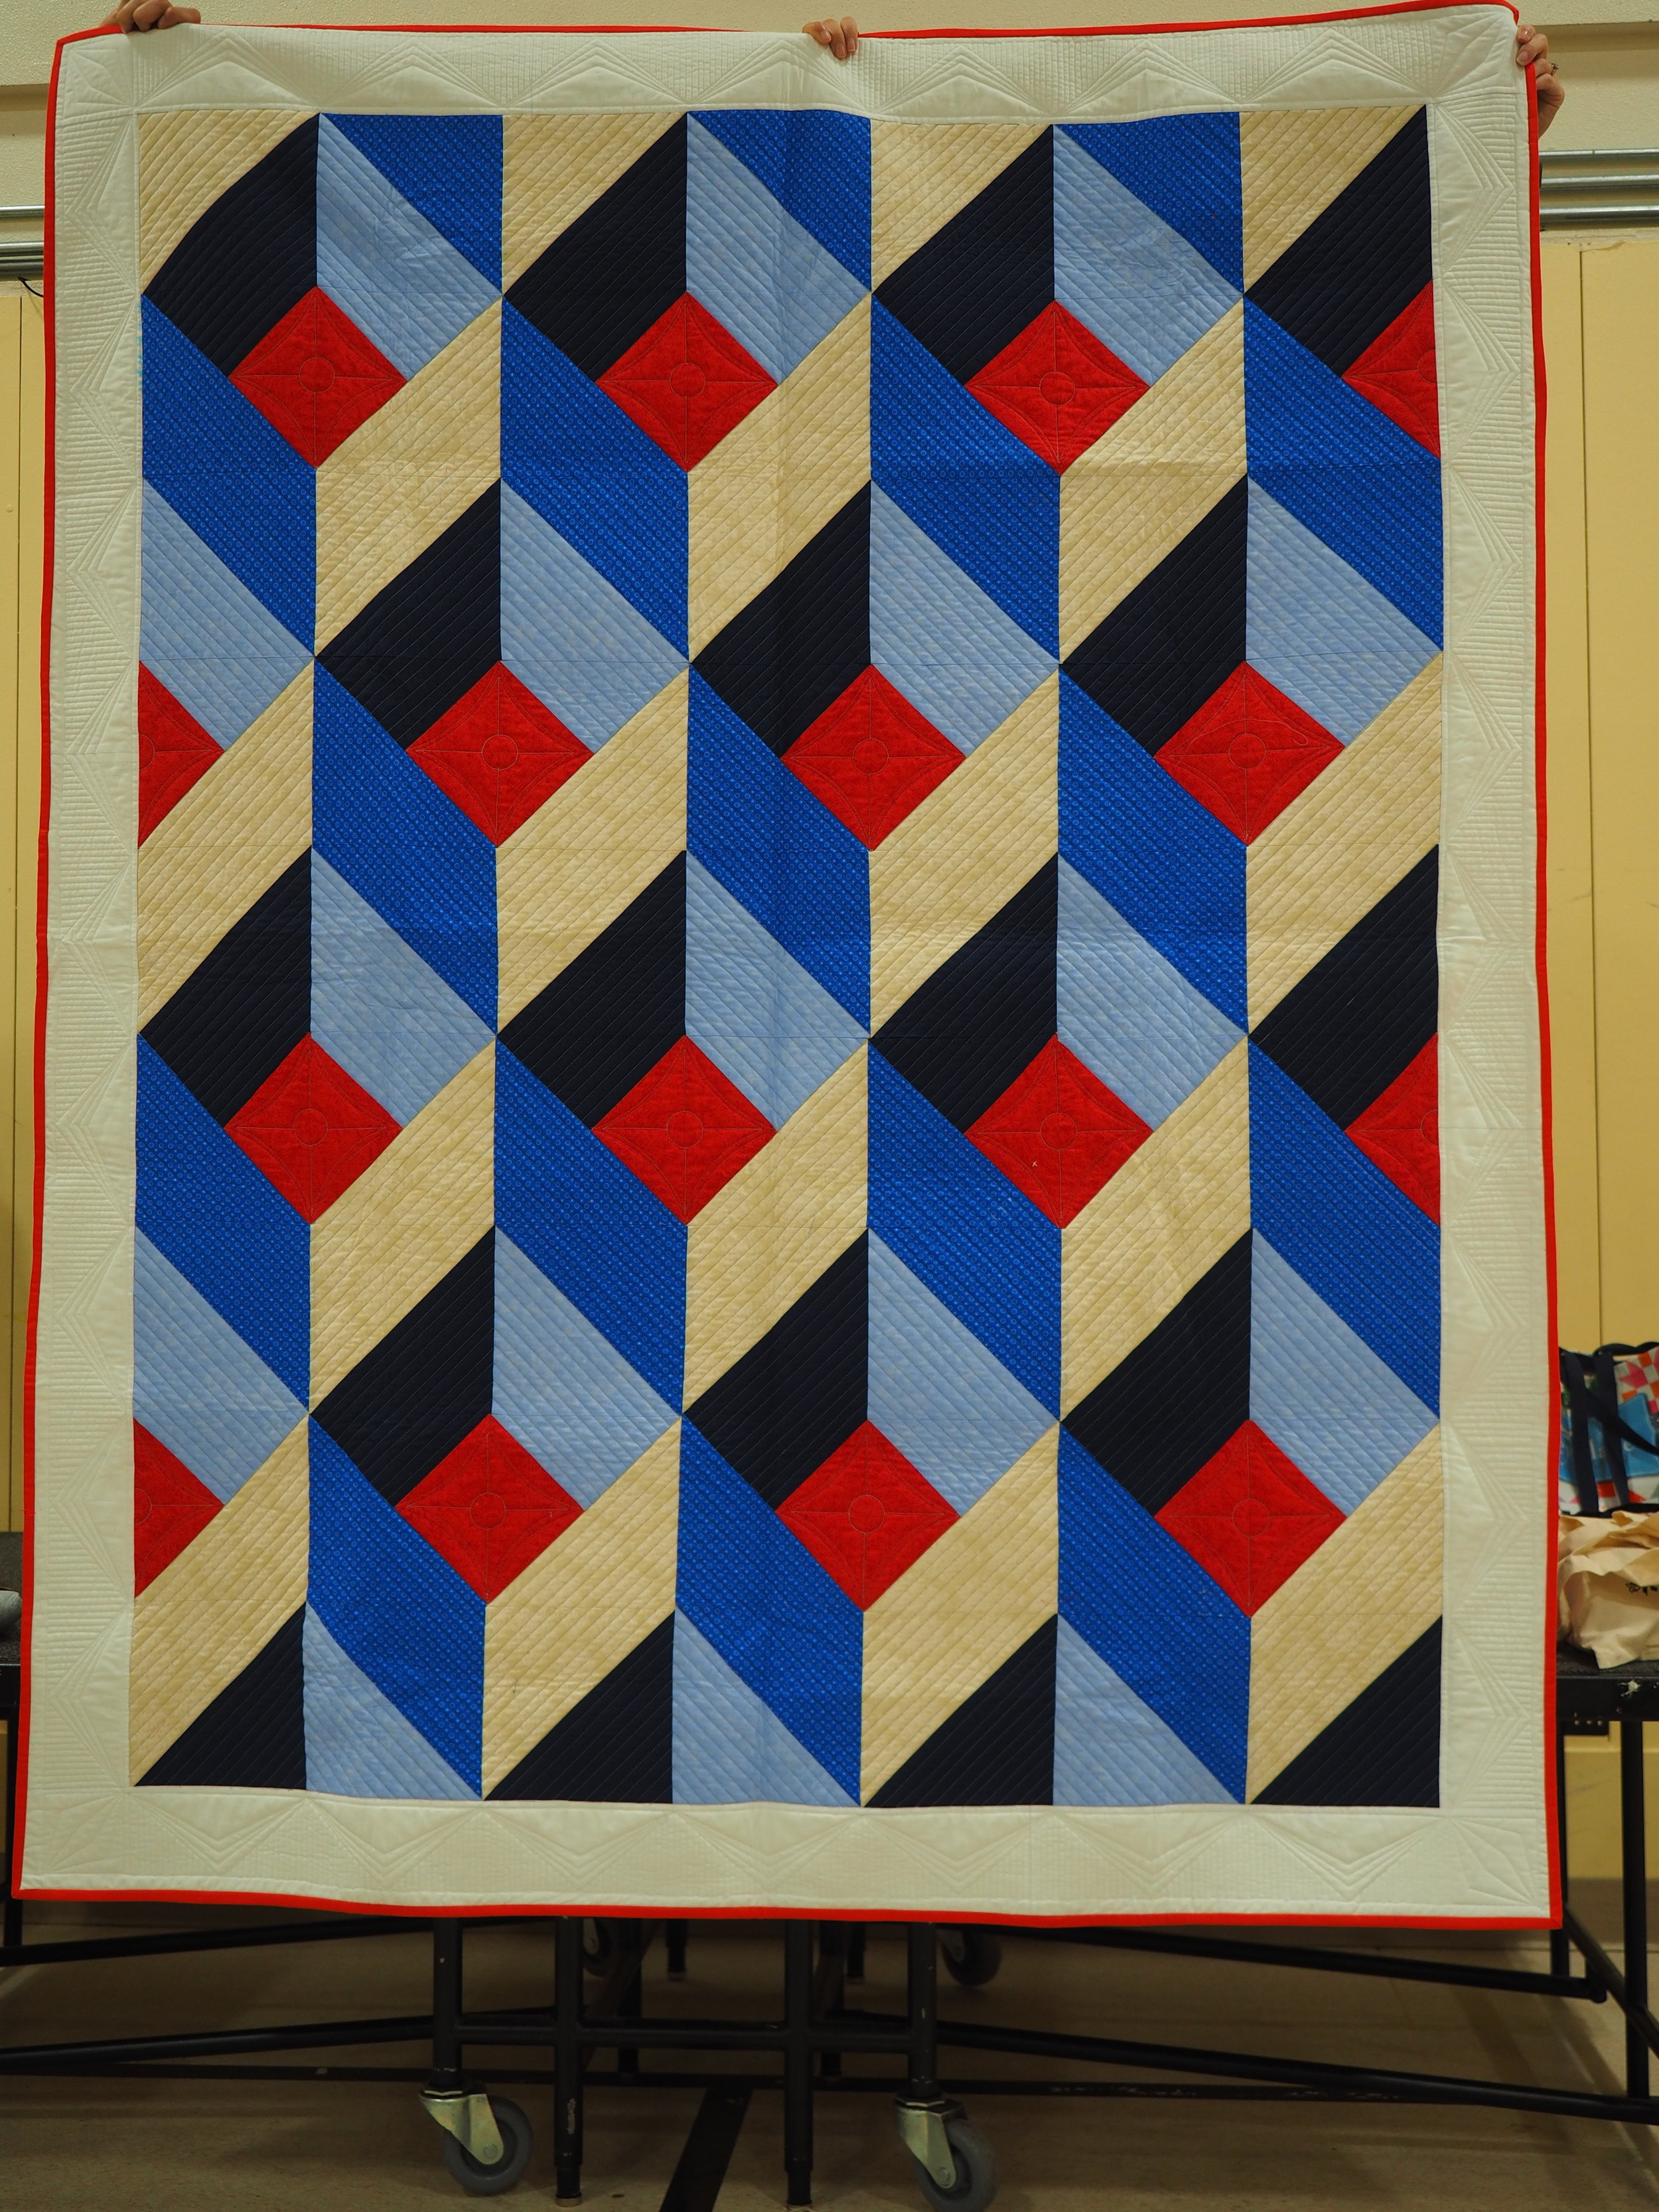  Michel McDowell - Conformity  Quilted by Kazumi Peterson 